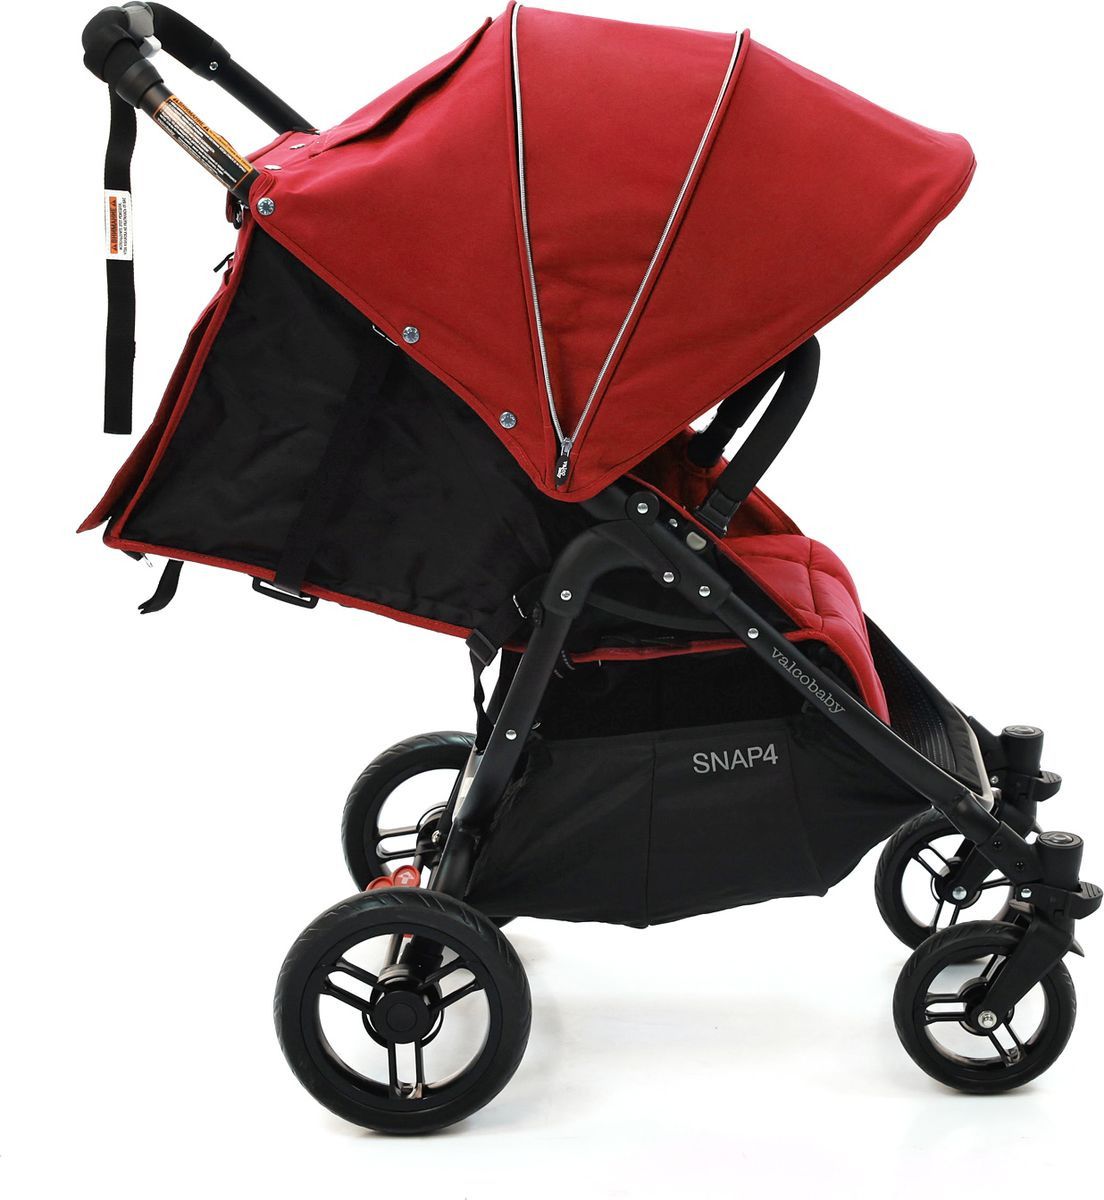   Valco Baby Snap 4 Fire red